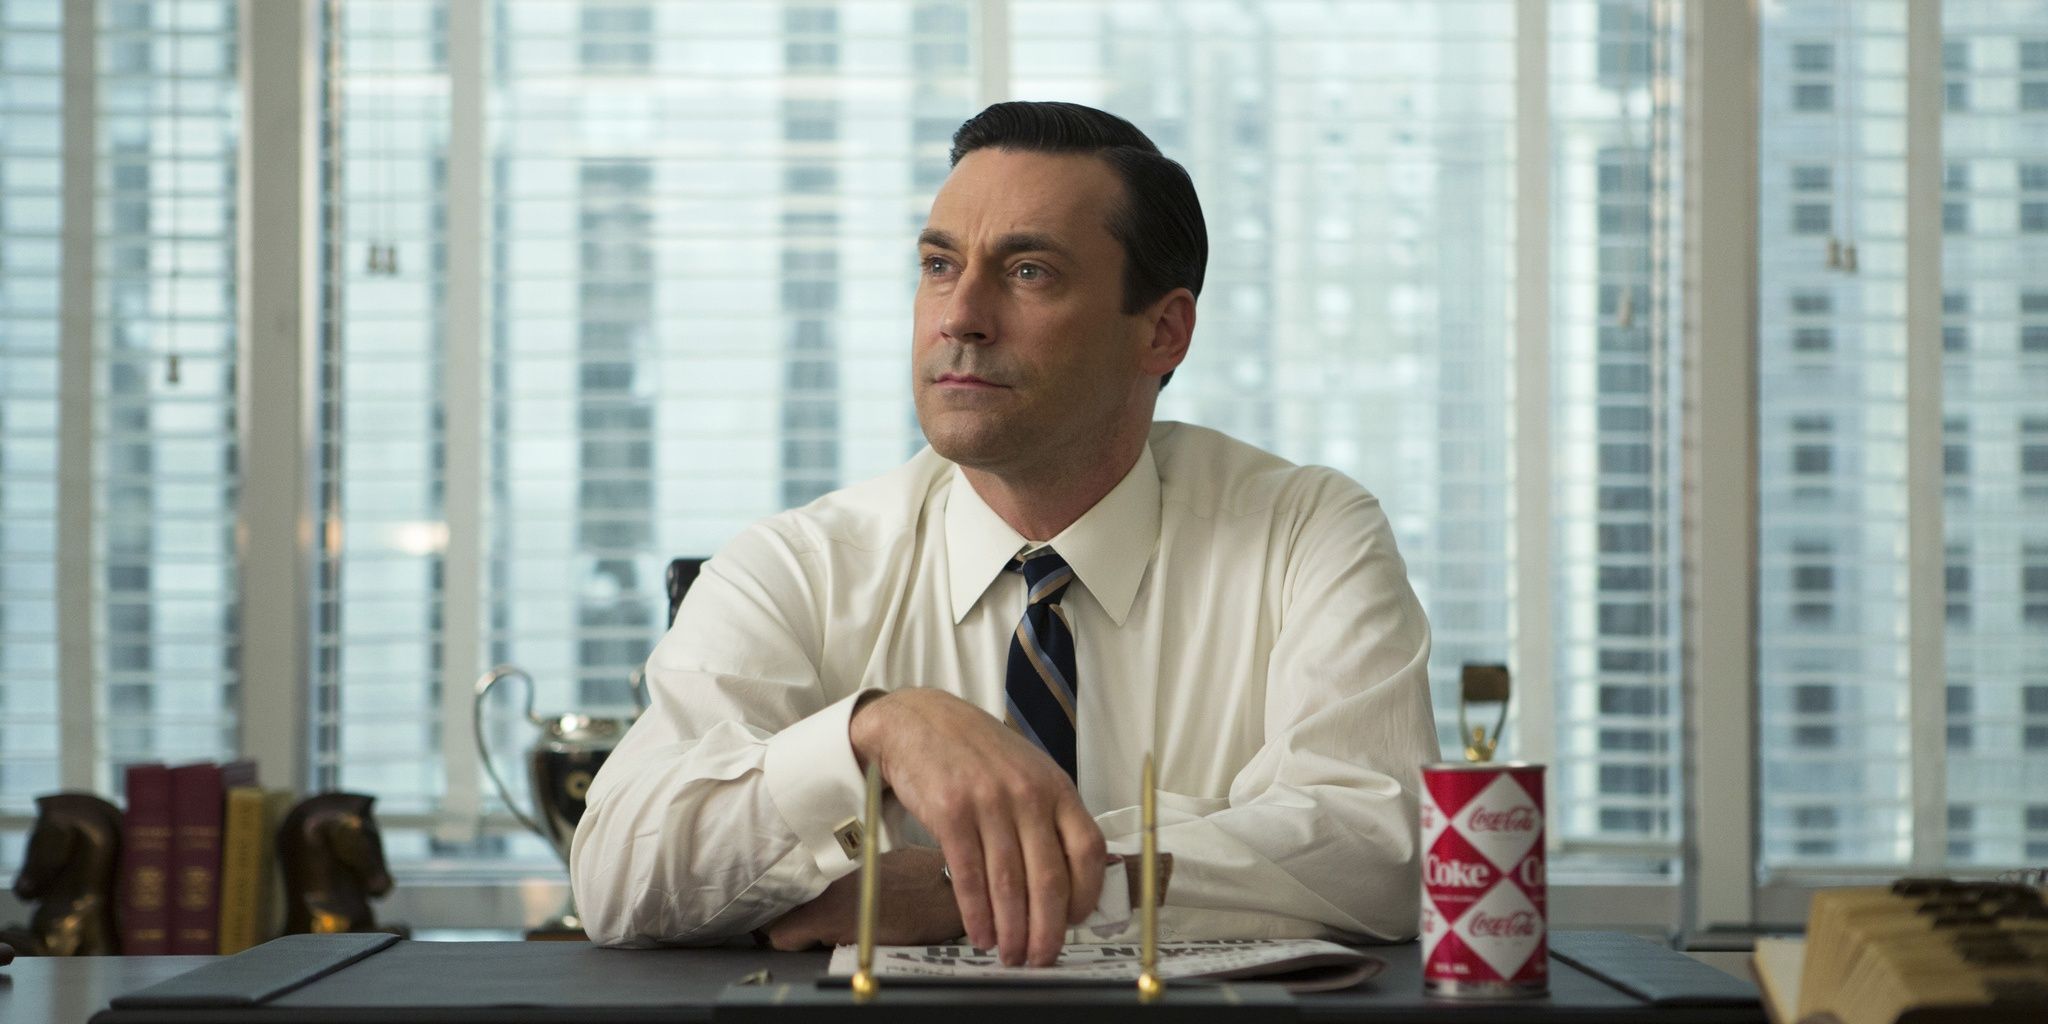 The 10 Best Characters Of Mad Men According To Reddit